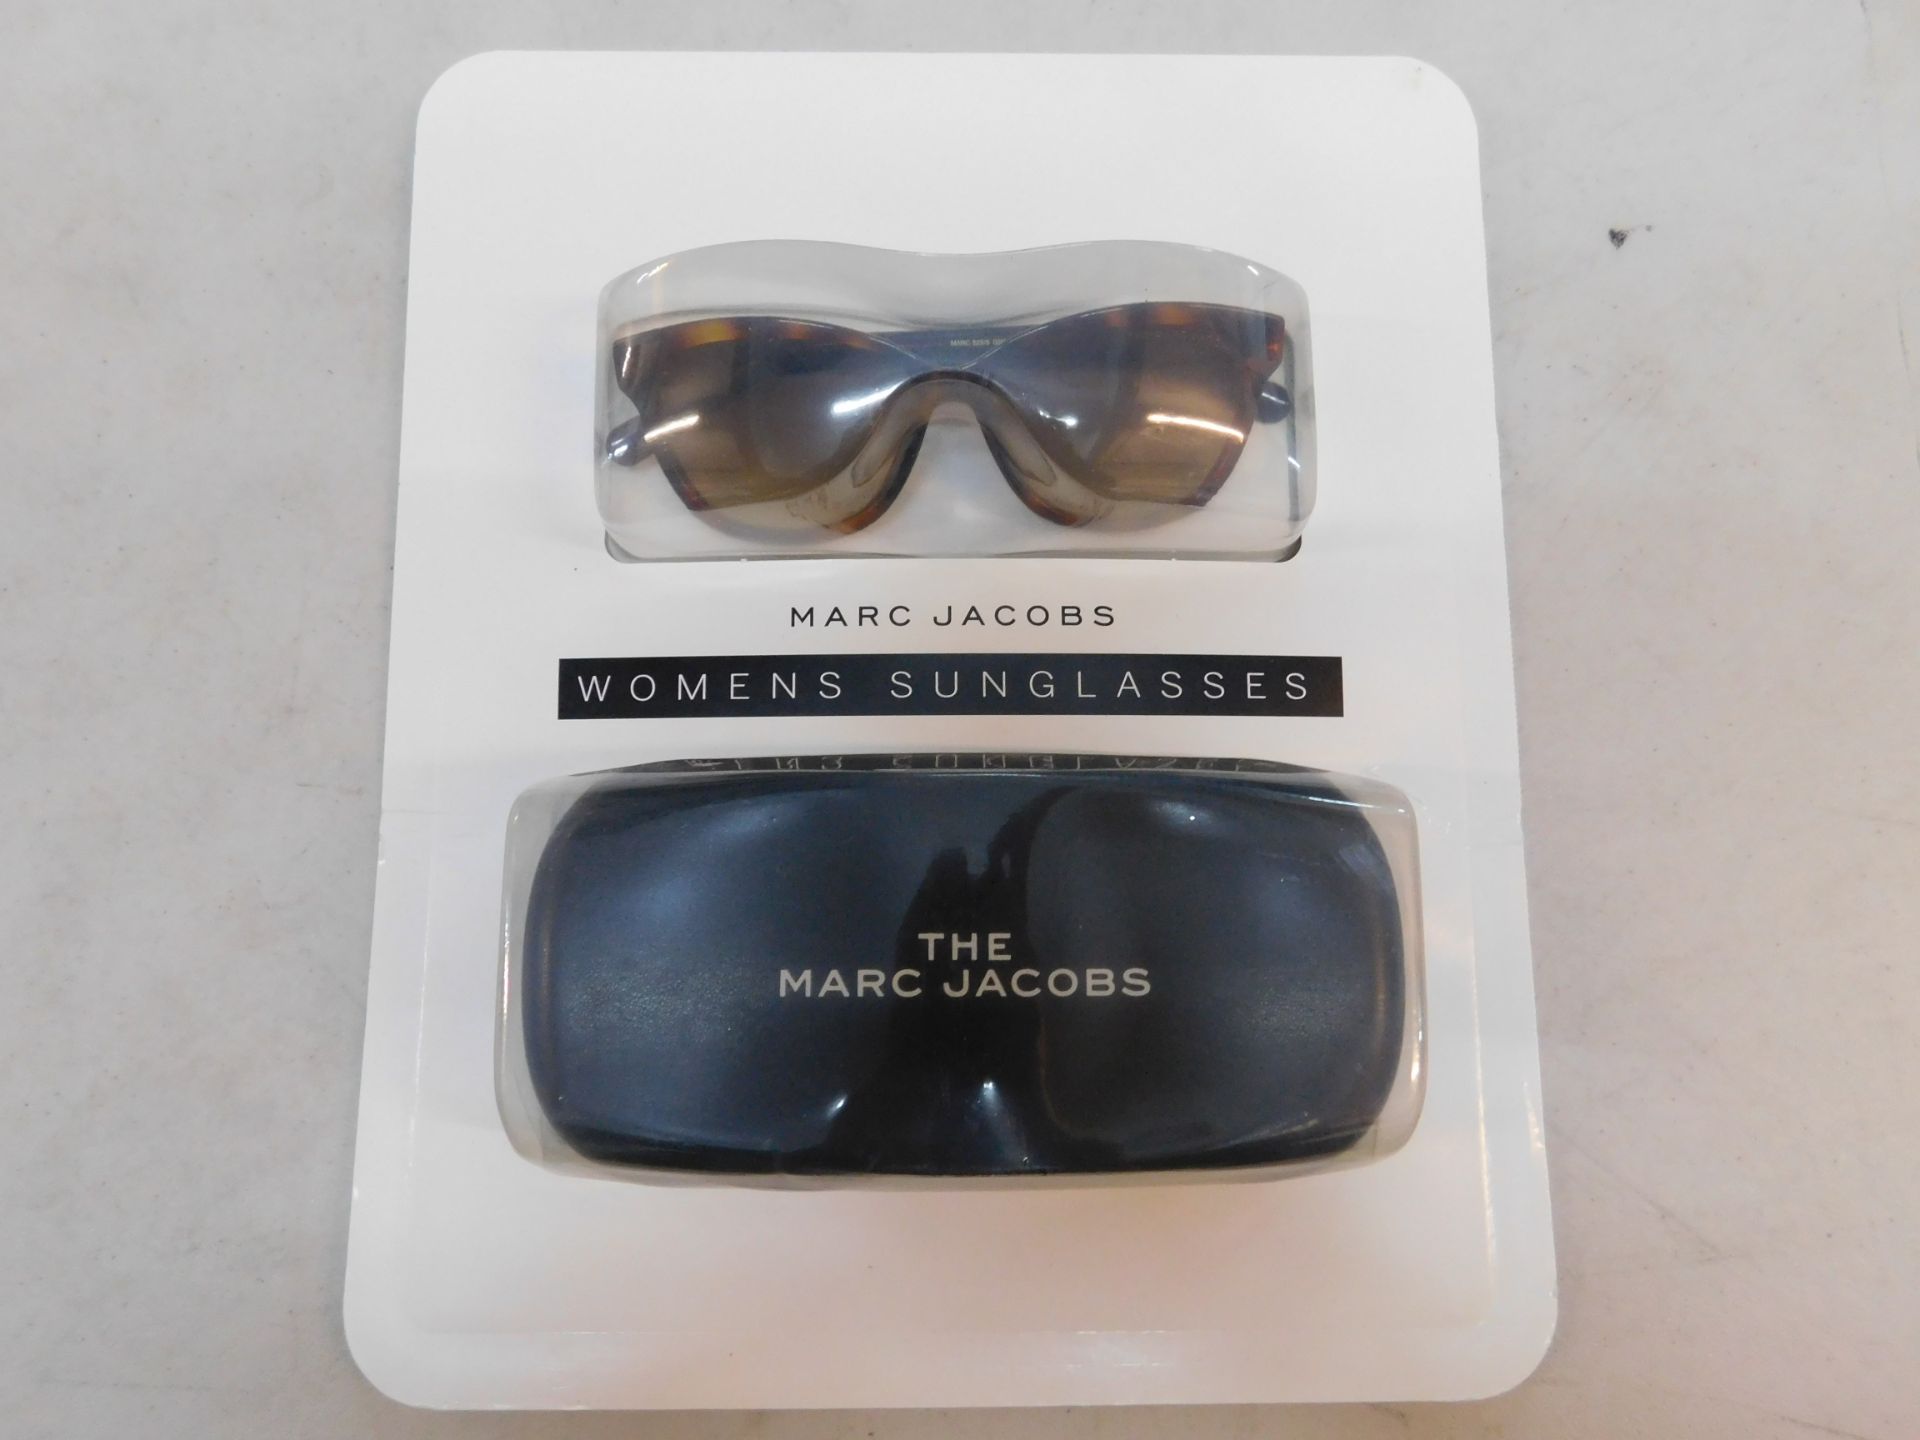 1 PACKED MARC JACOBS SUNGLASSES RRP Â£49